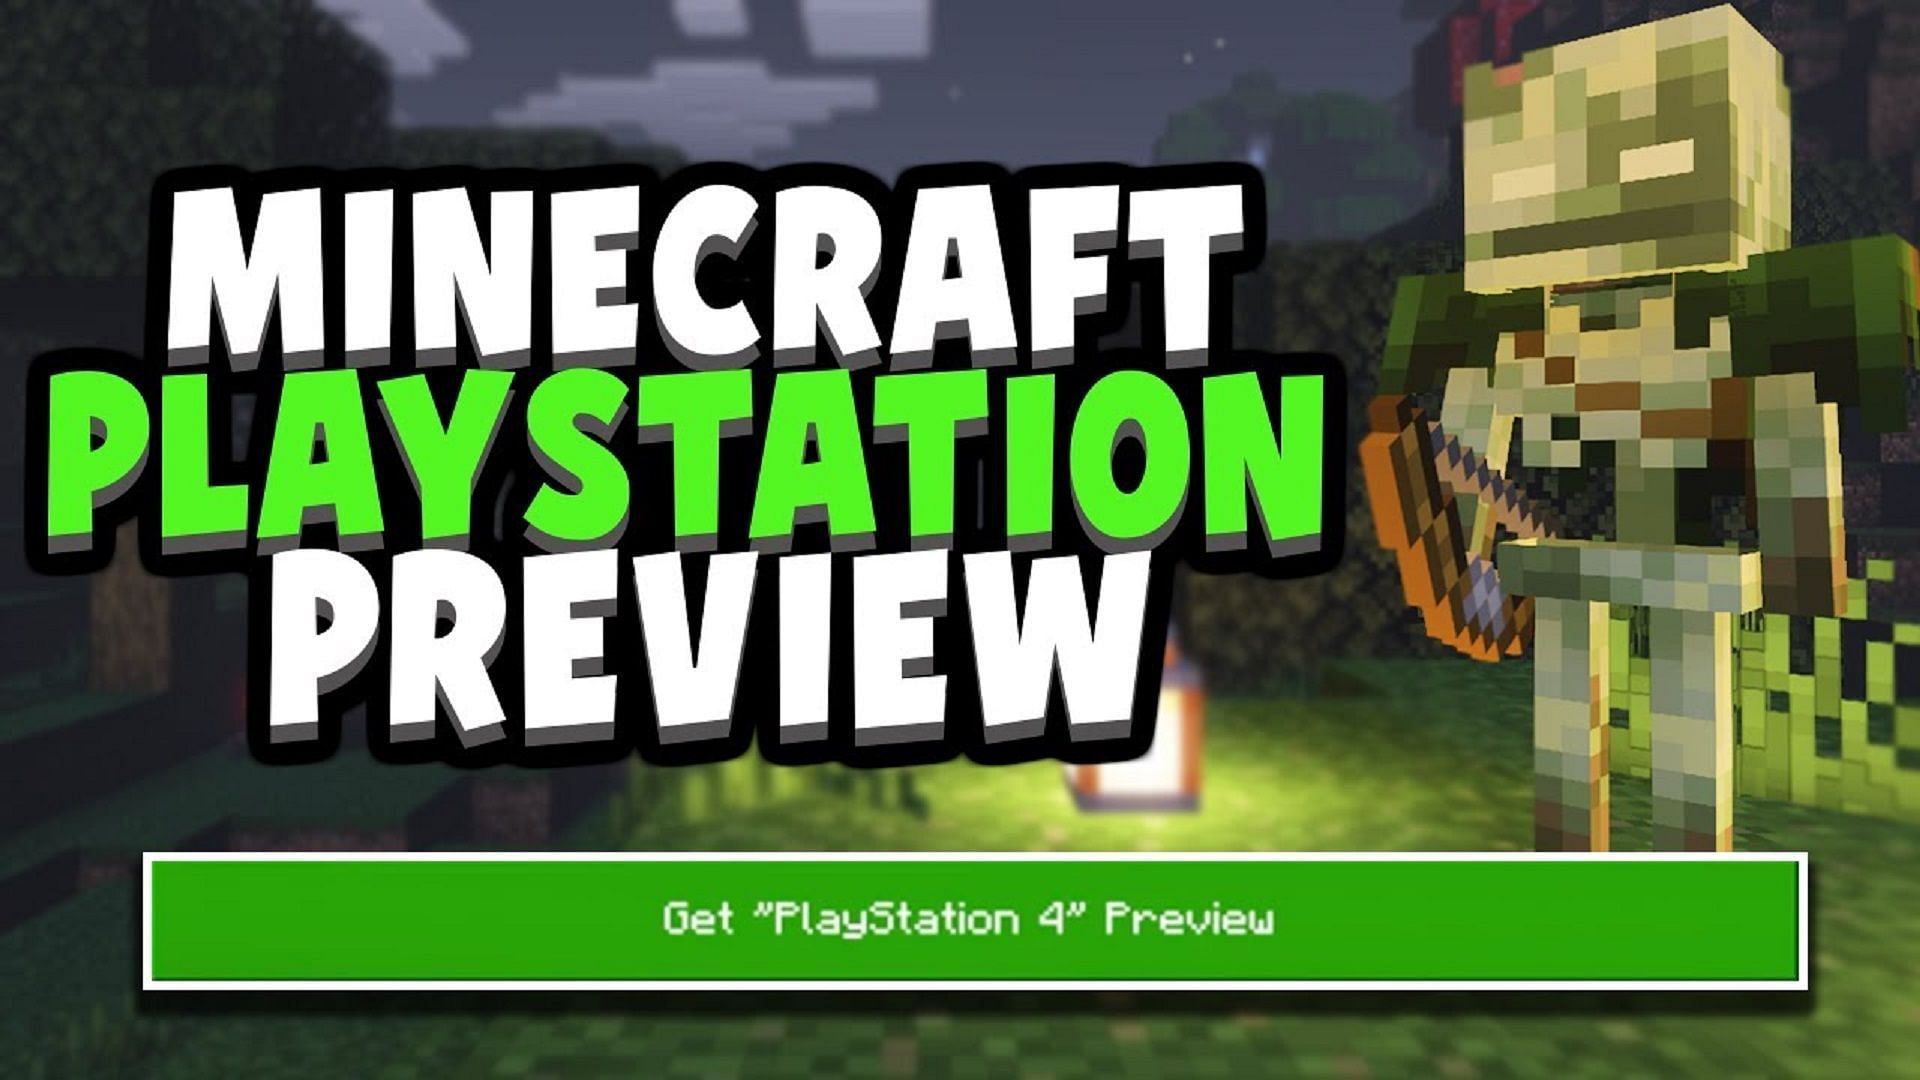 Minecraft Preview was recently introduced to PS4 consoles (Image via ECKOSOLDIER/YouTube)